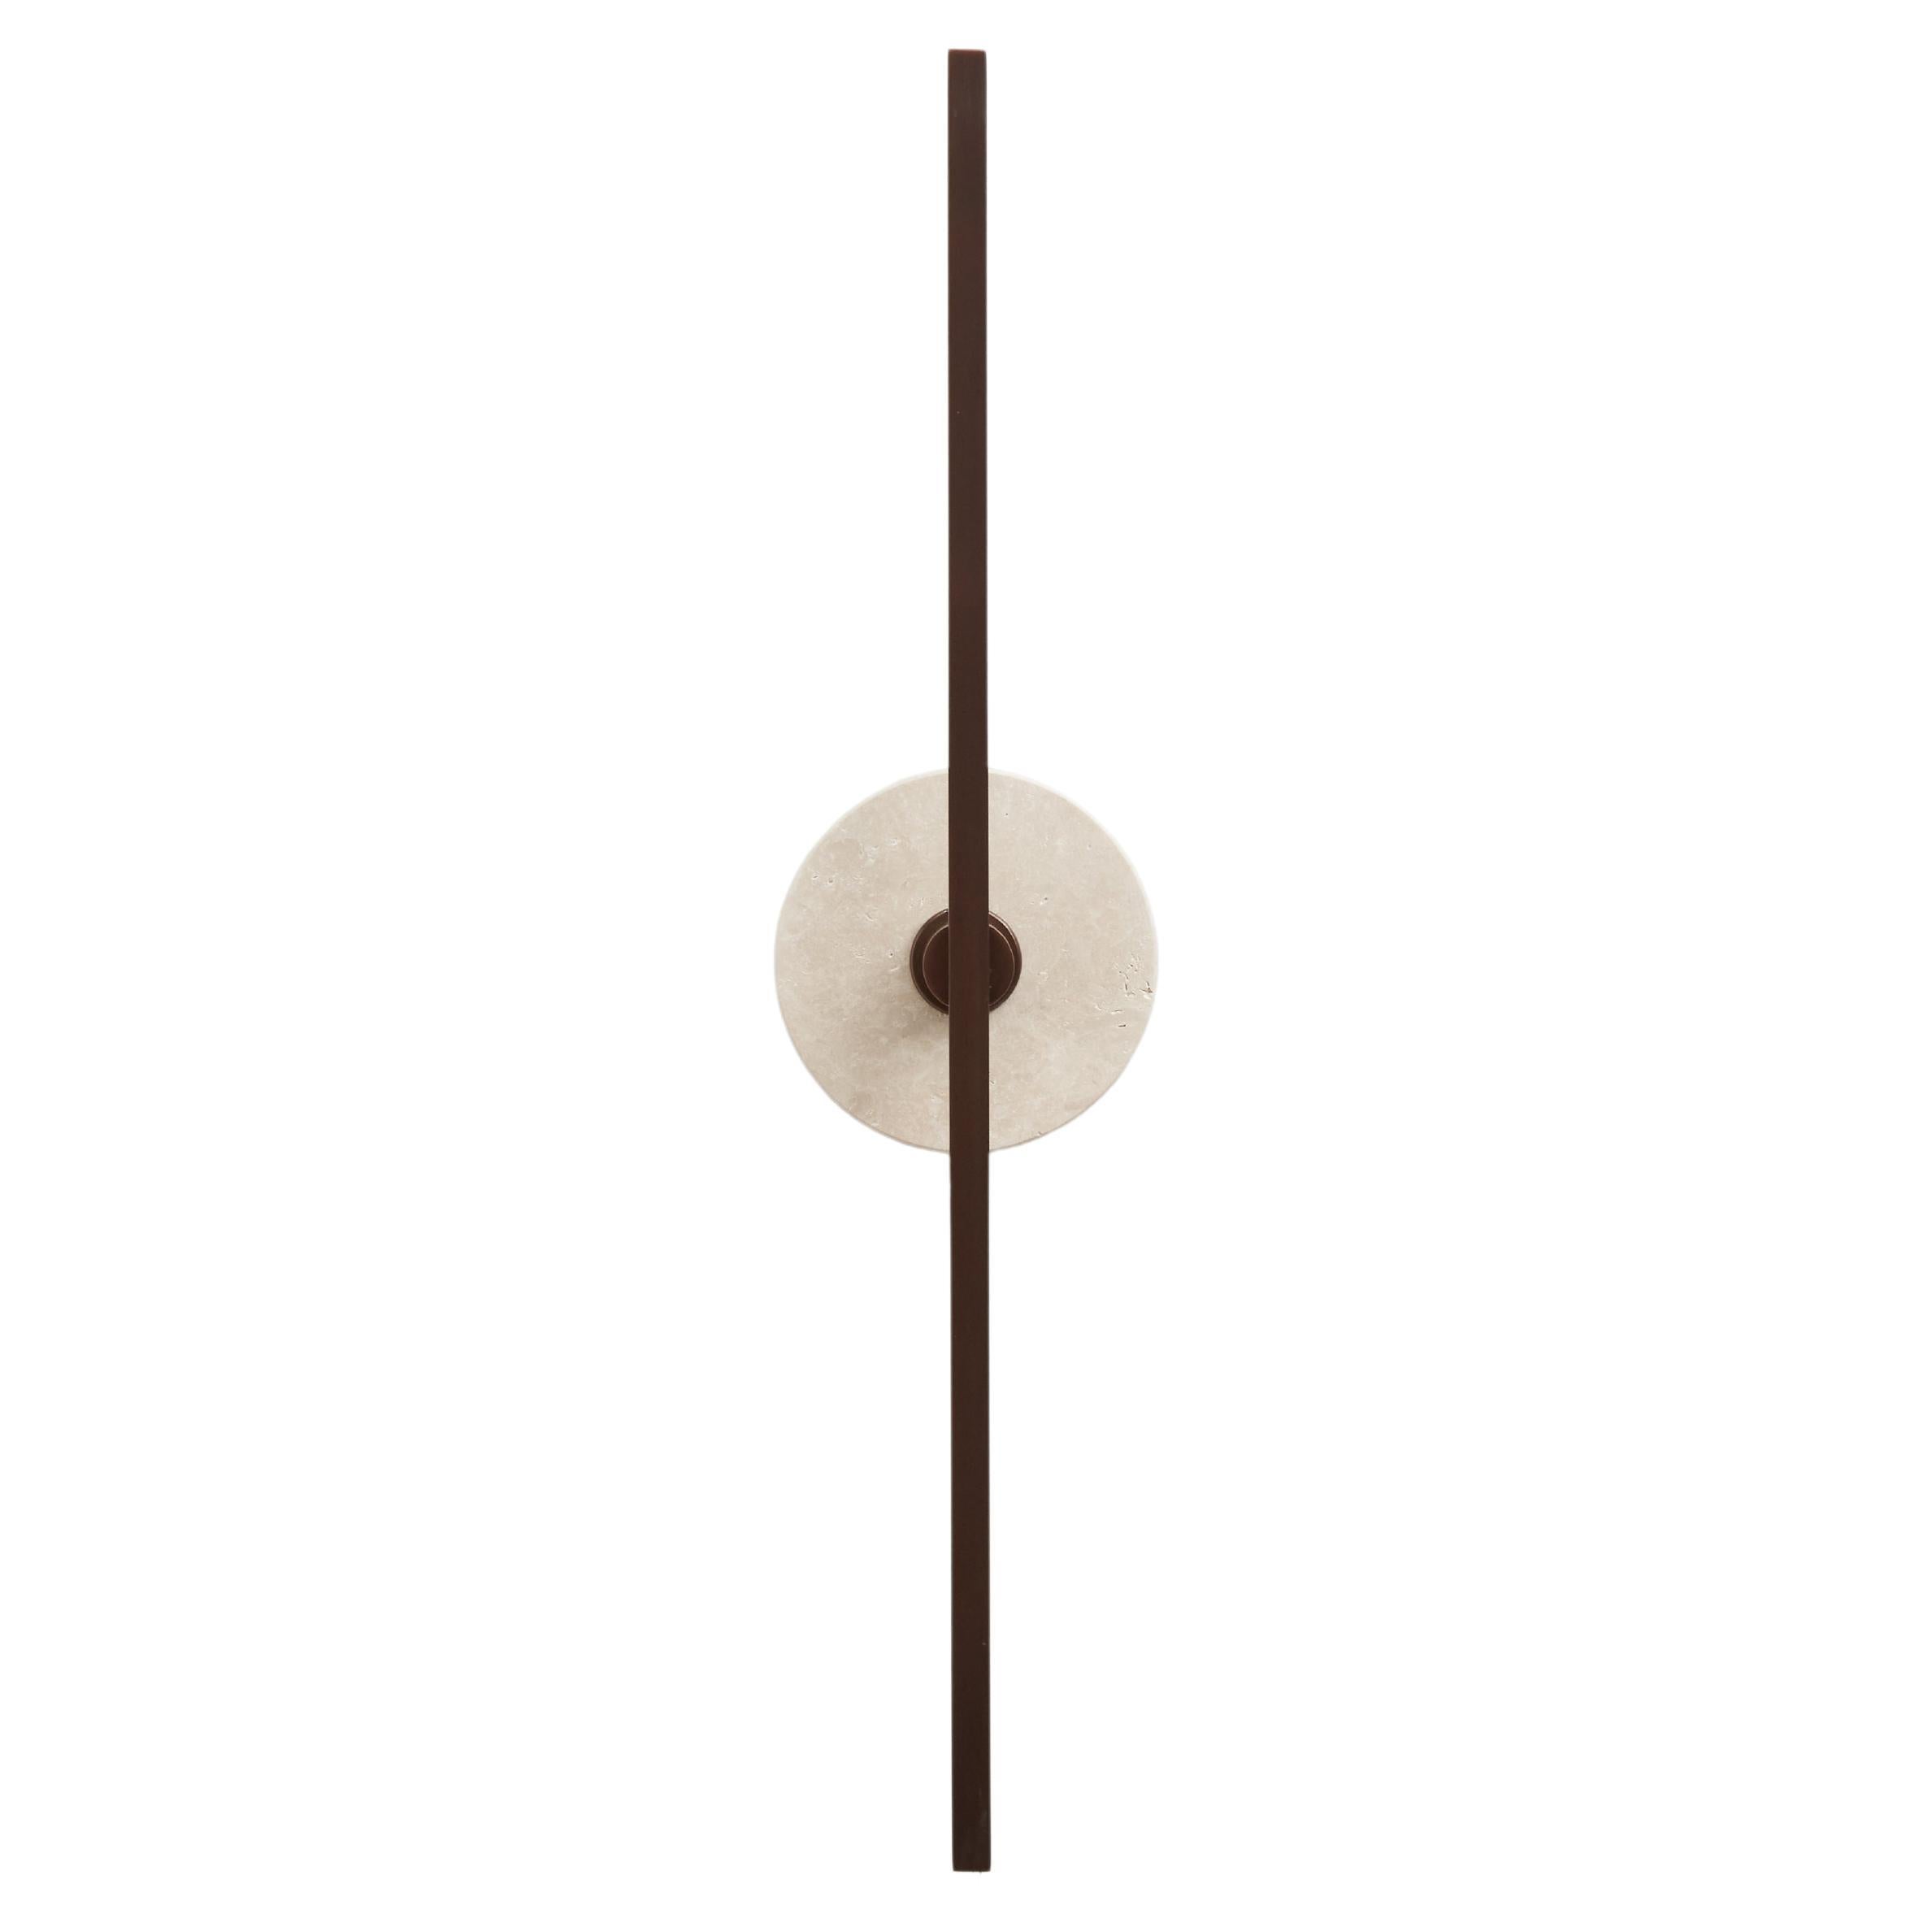 Essential Italian Wall Sconce "Stick" - Bronze and Travertine Marble